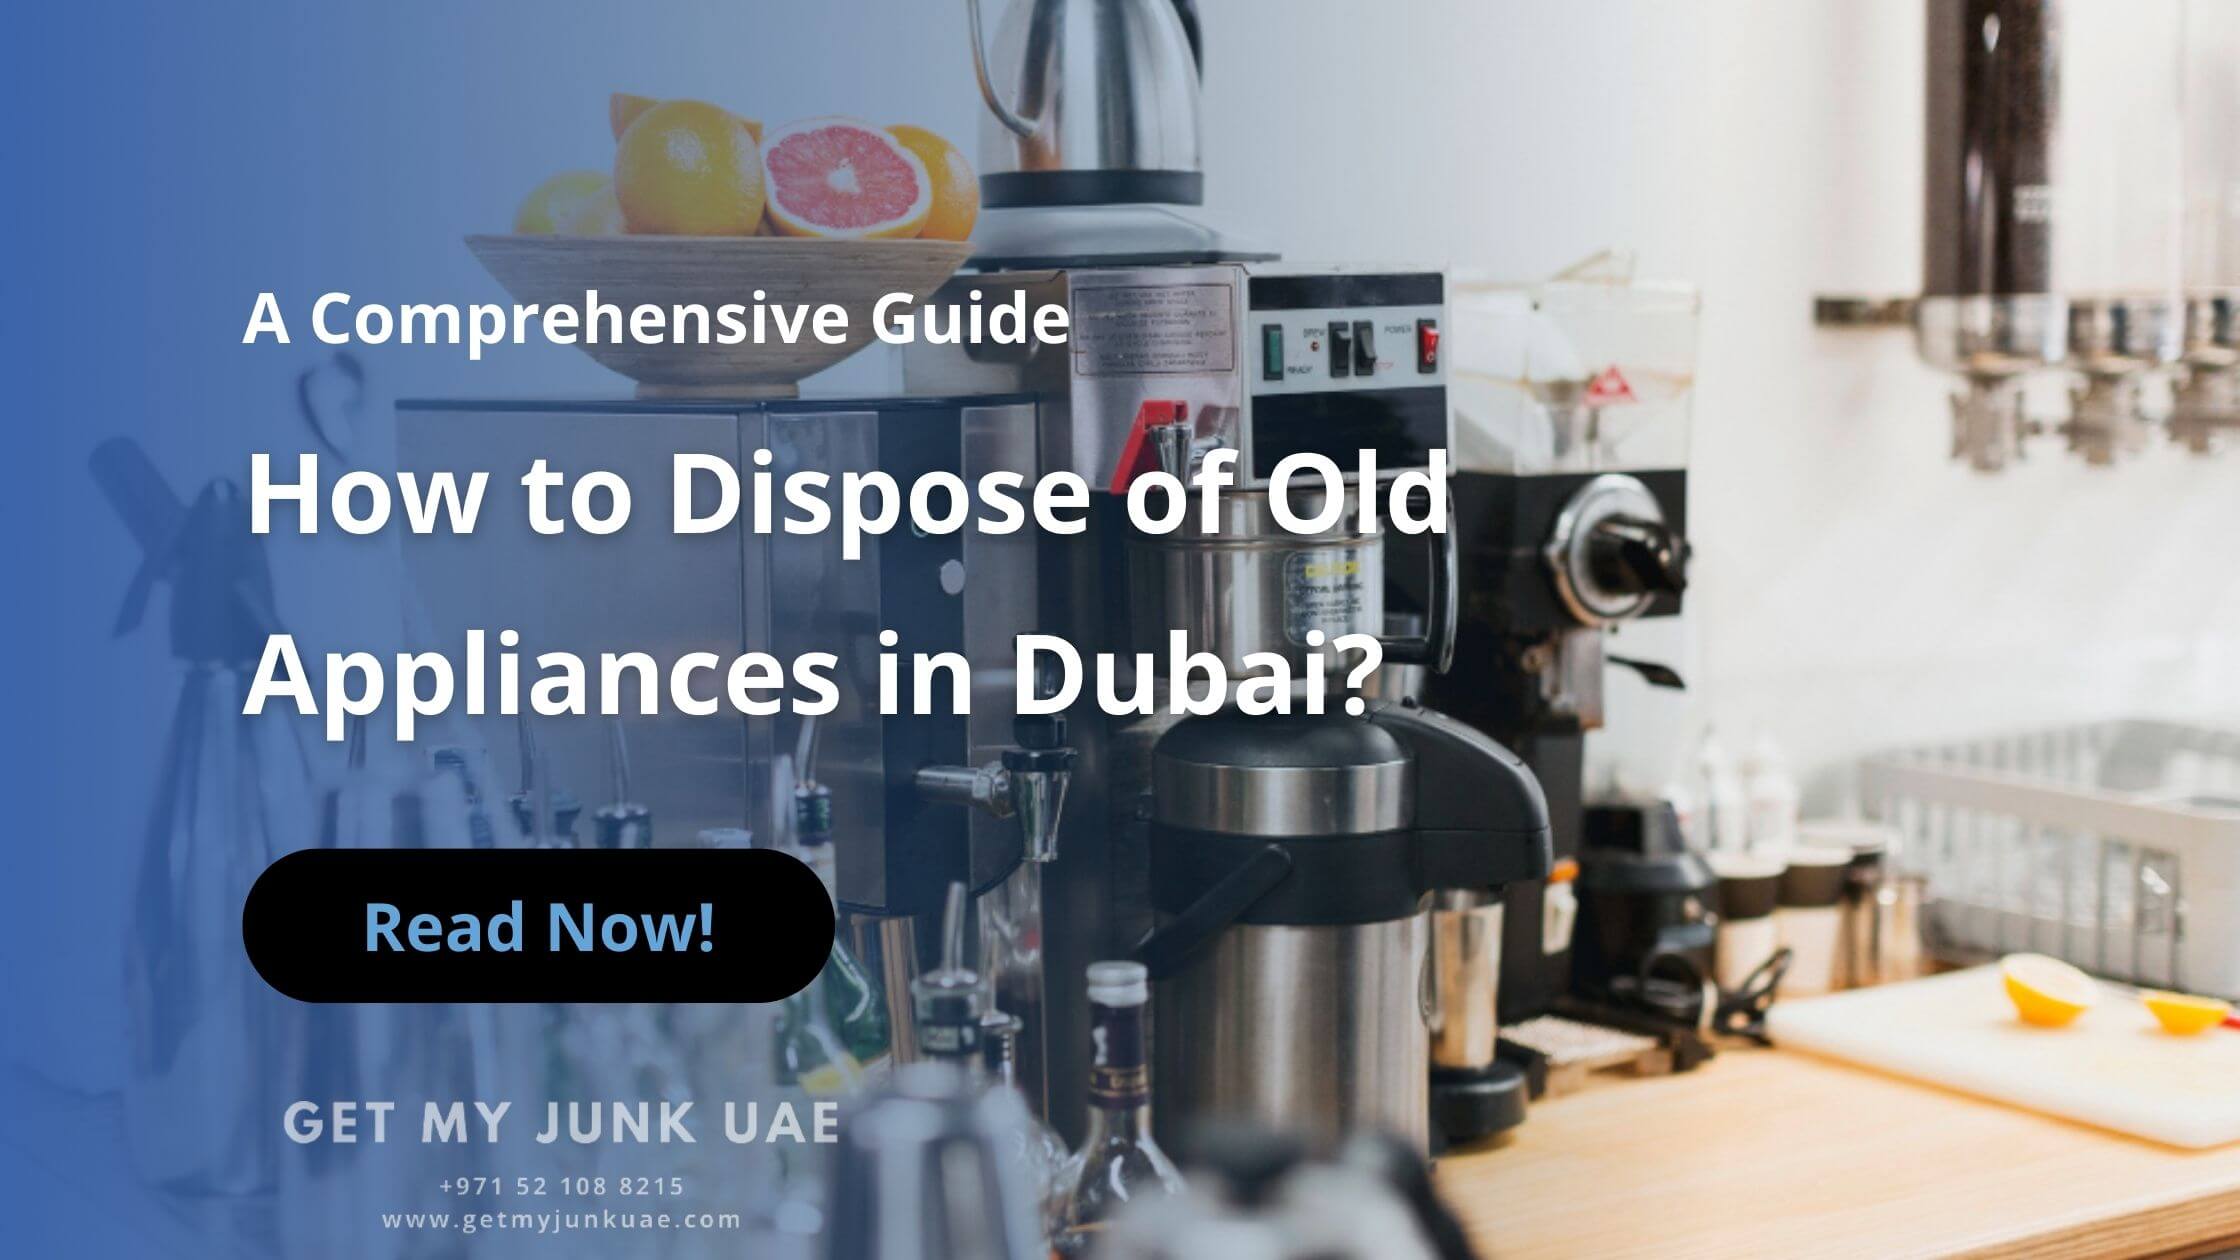 How to Dispose of Old Appliances in Dubai? Free Appliances Disposal in Dubai by Get My Junk UAE